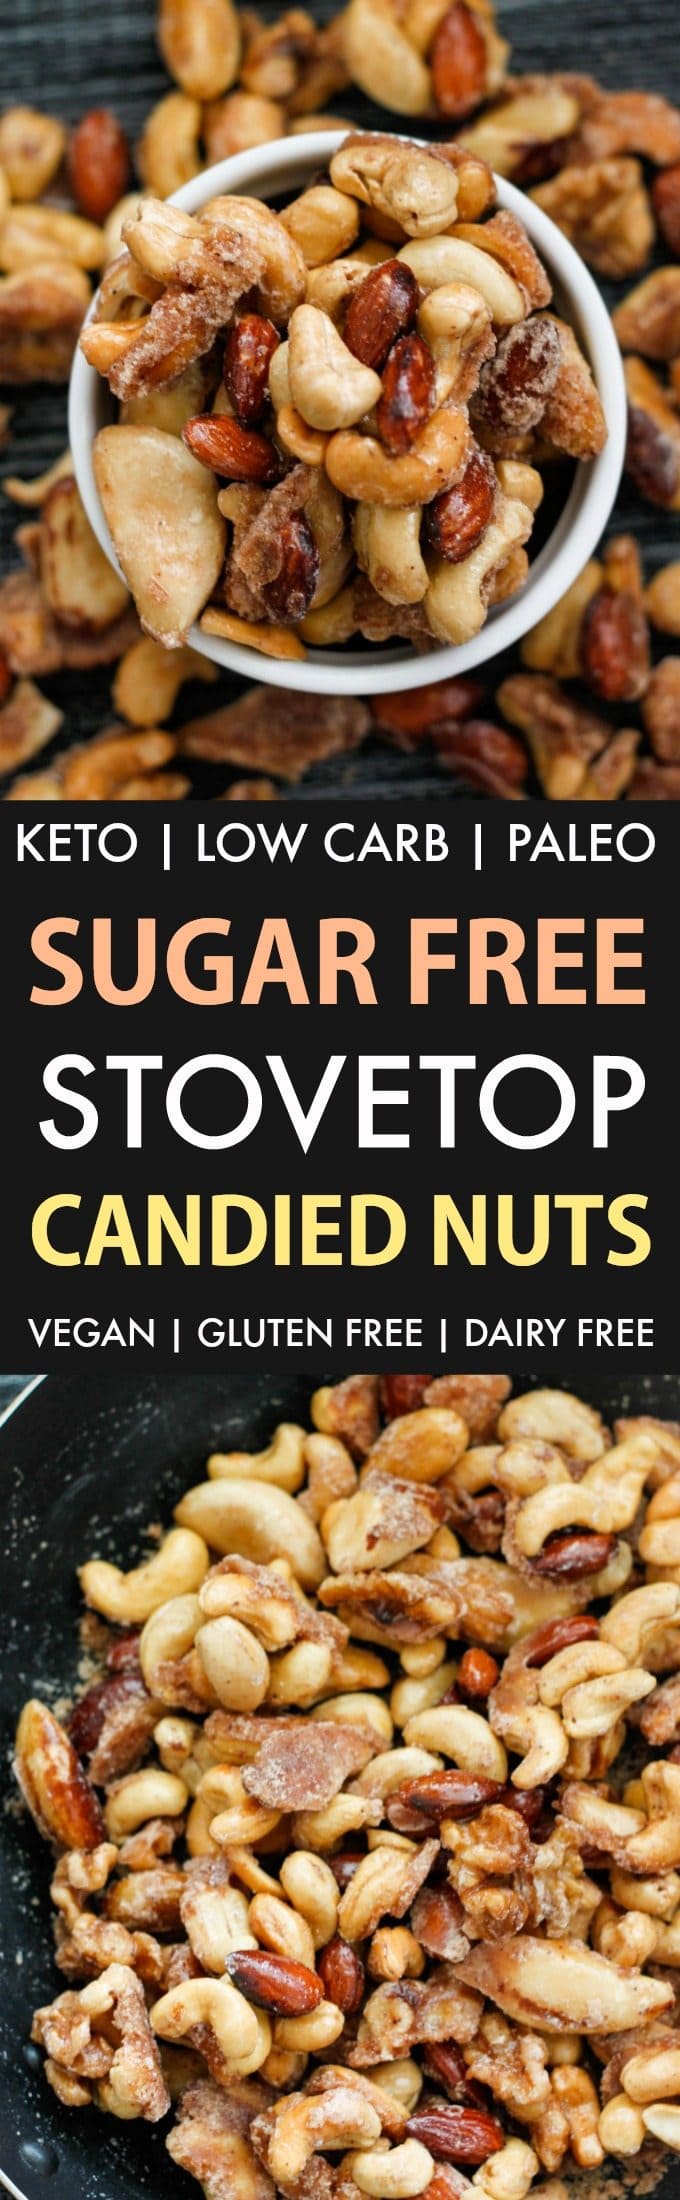 Sugar-Free Stovetop Candied Nuts (Keto, Low Carb, Paleo)- Stovetop made candied nuts made with zero sugar or oil- Perfect for holidays, gifts and every day guilt-free snacking! {vegan, gluten free, dairy free recipe}- #nuts #sugarfree #lowcarb #ketodessert | Recipe on thebigmansworld.com